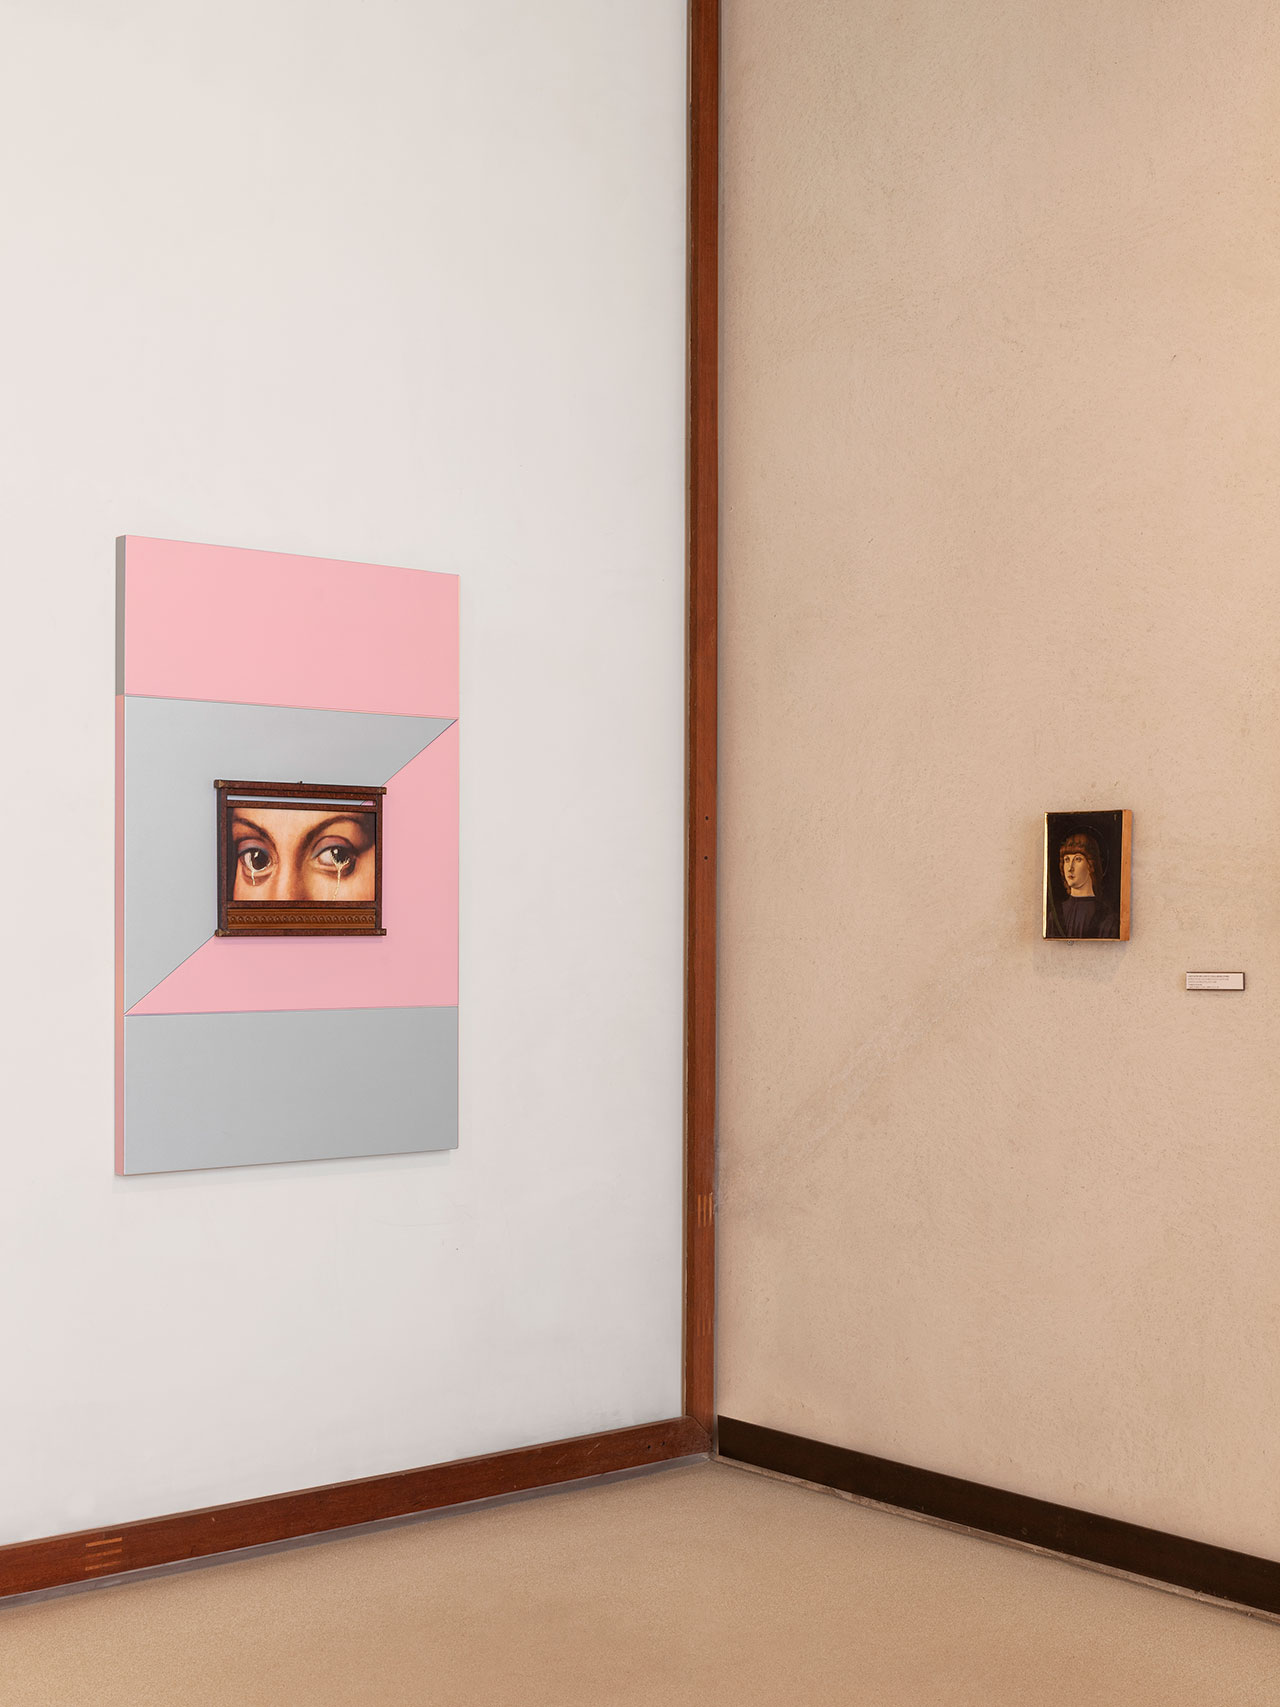 Francesco Vezzoli, PEEP SHOW (AFTER GIOVAN FRANCESCO CAROTO), 2024.
Inkjet print on canvas, metallic embroidery, artist's frame, 32.5 x 41.5 cm.
Installation view, Musei delle Lacrime, 2024, Museo Correr, Venice, Italy.
Courtesy the Artist and APALAZZOGALLERY.
Photography by Melania Dalle Grave, DSL Studio.